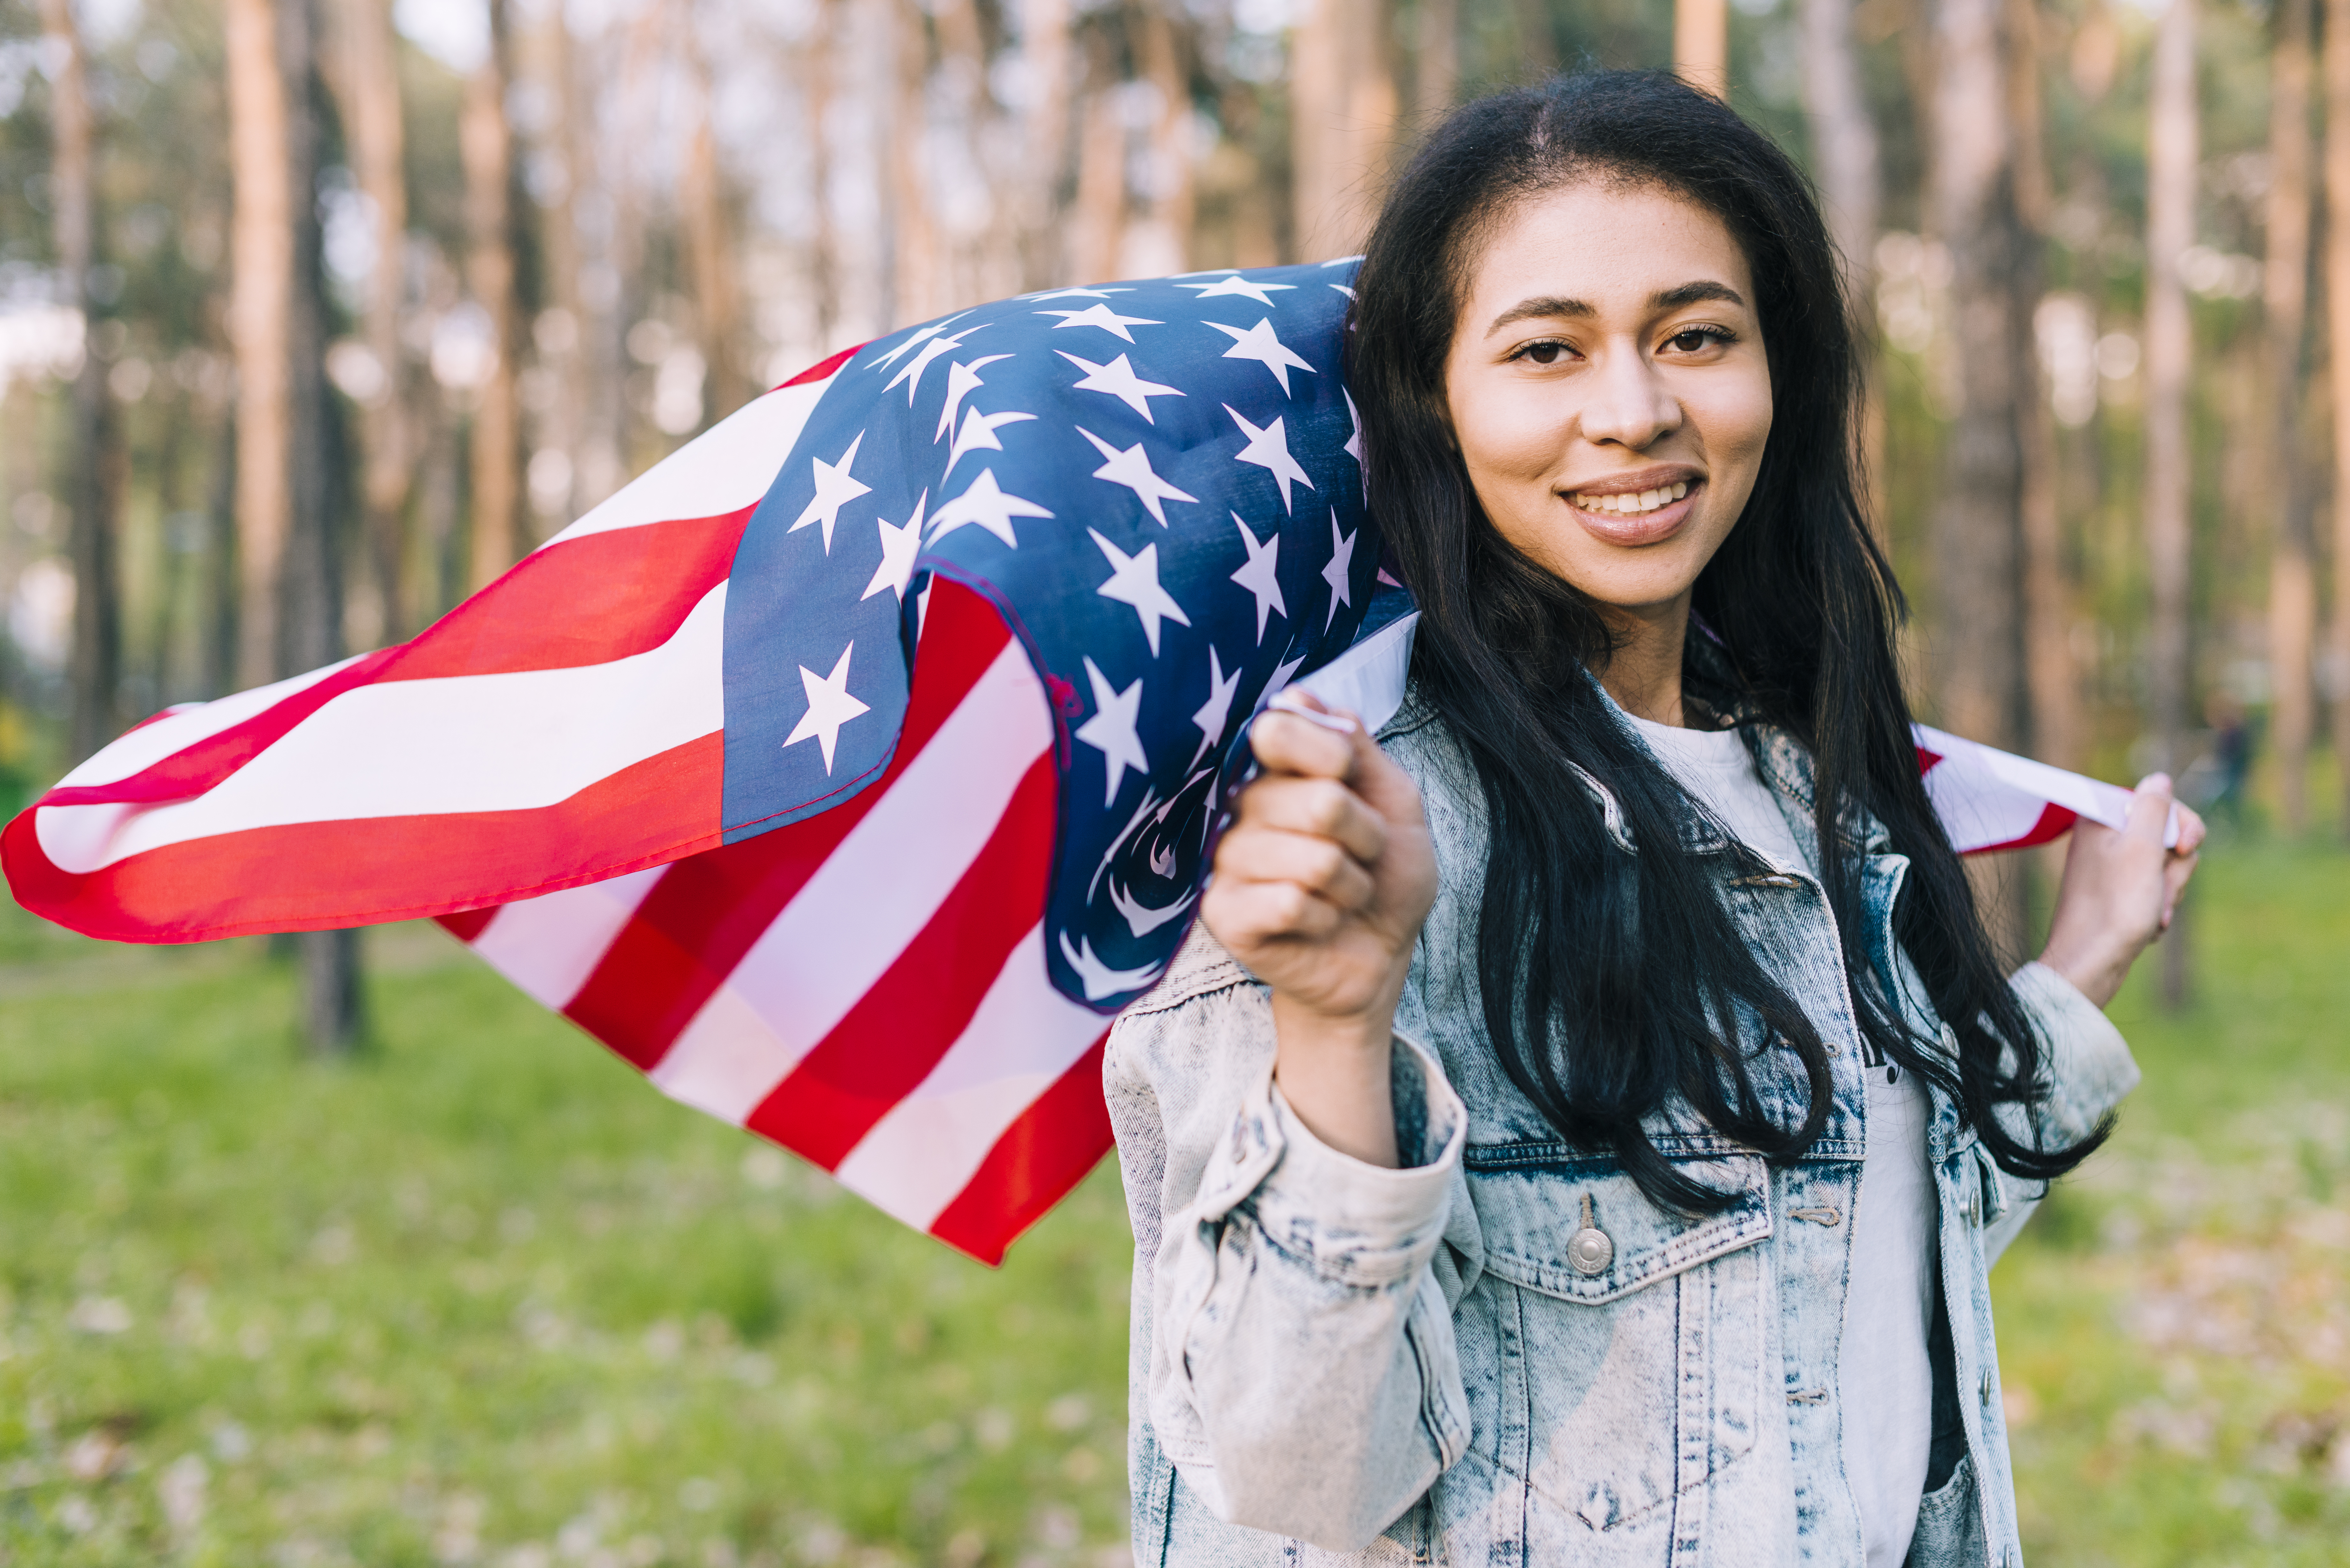 Smiling young female holding flying USA flag